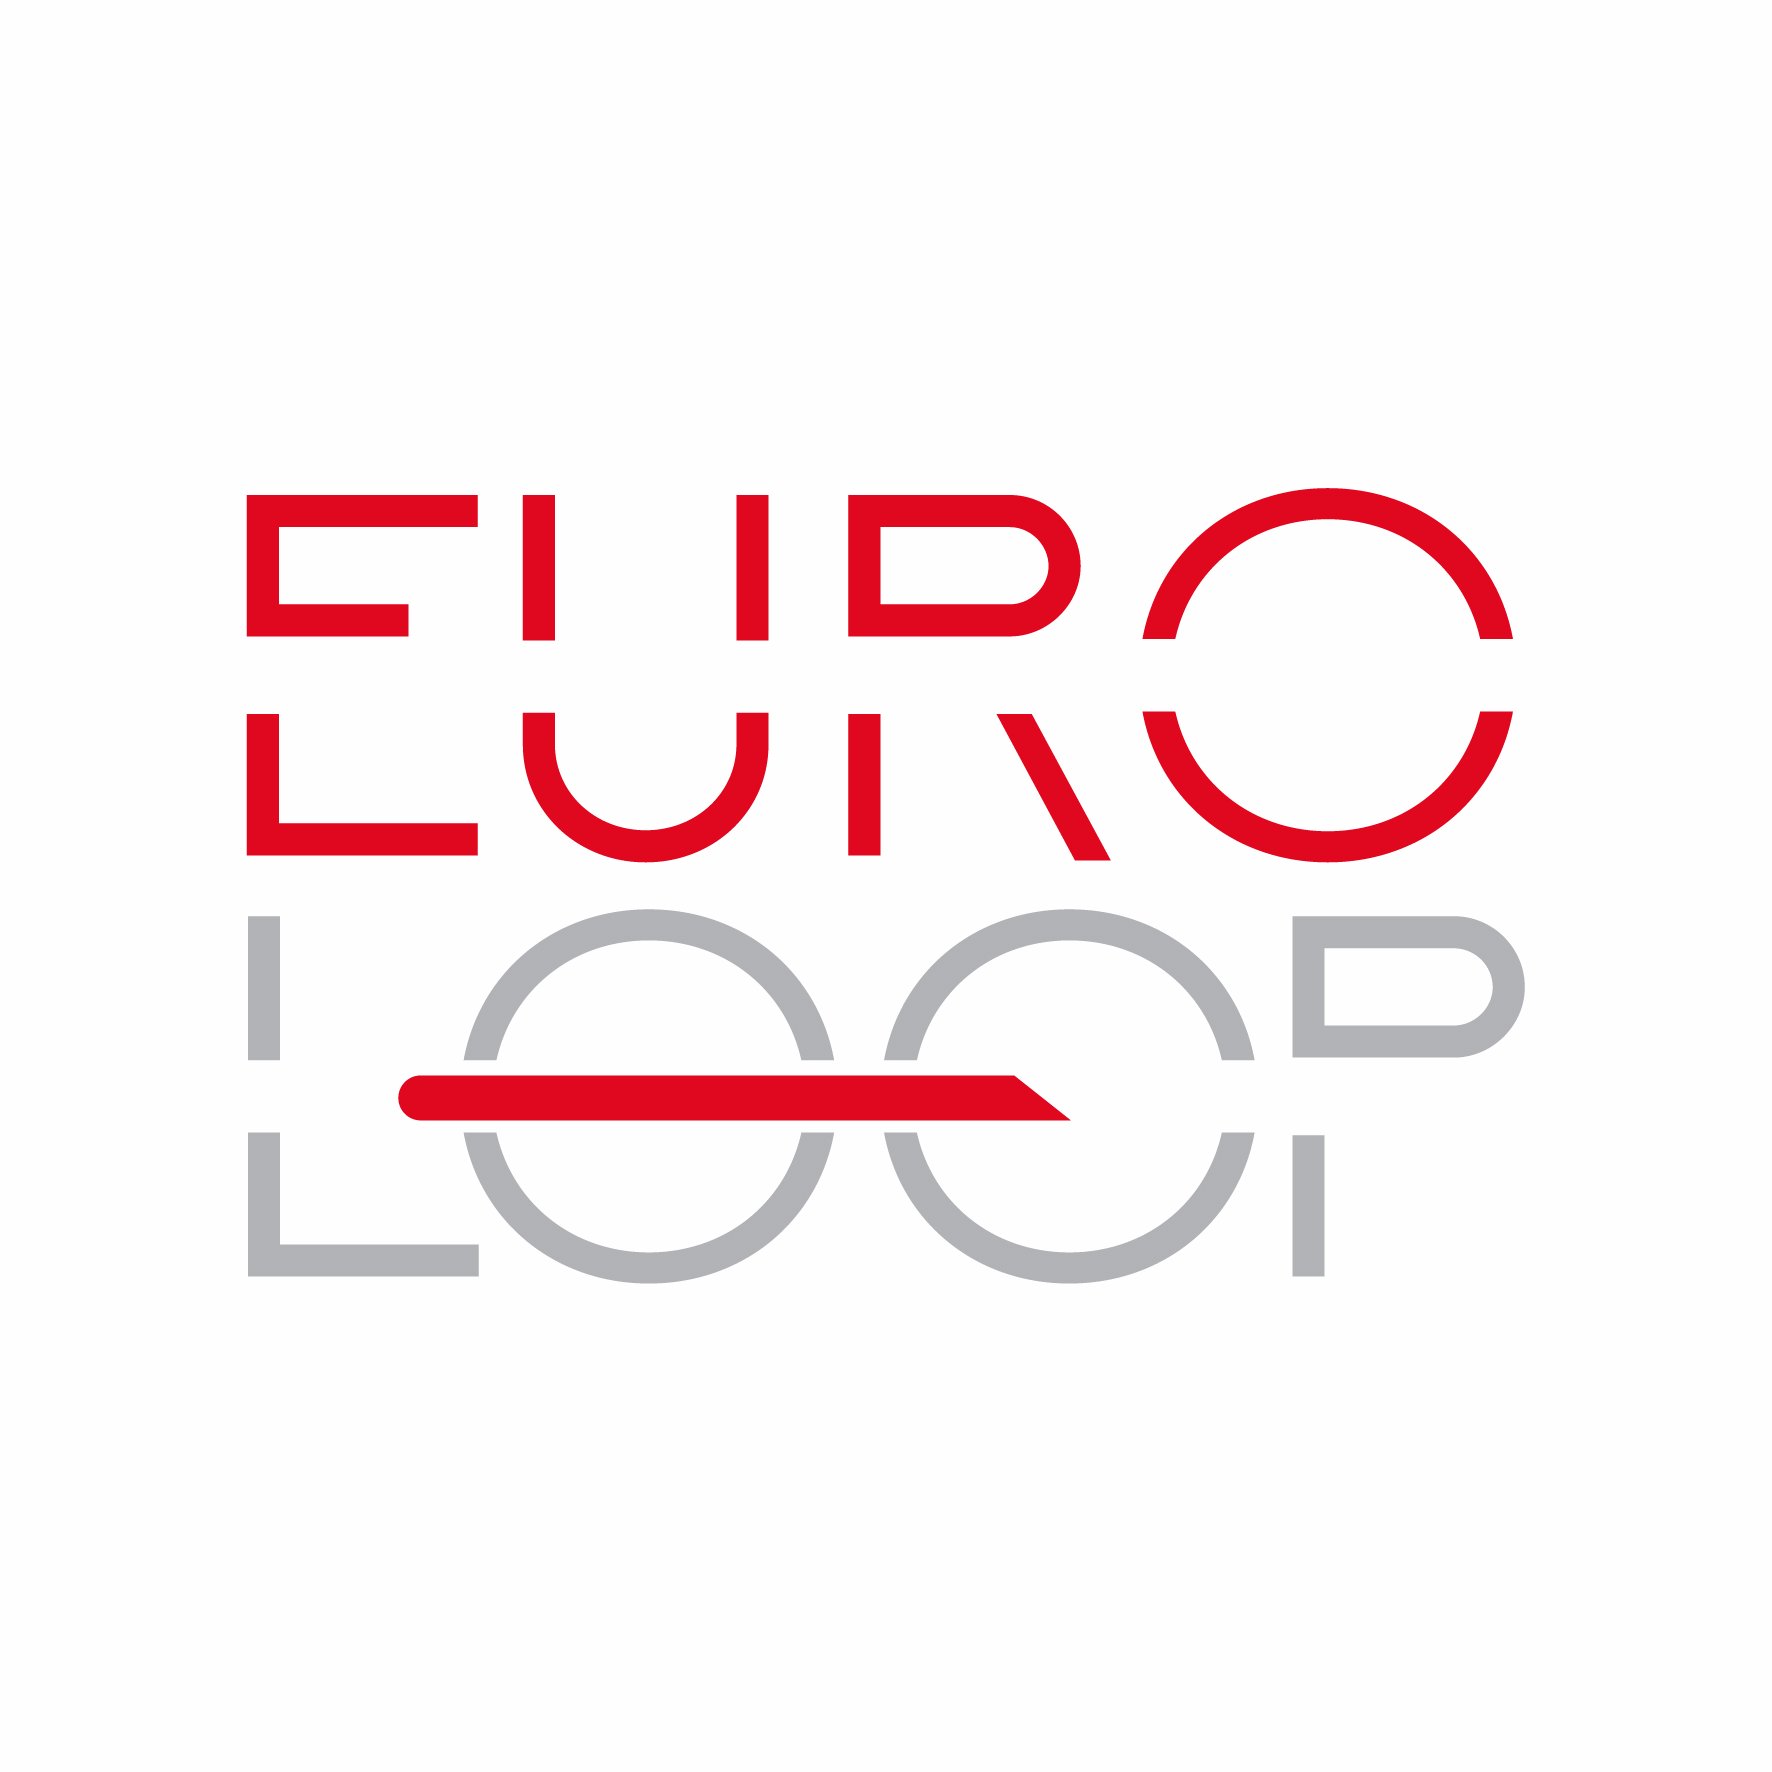 Official account of Euroloop. - The future of transportation.